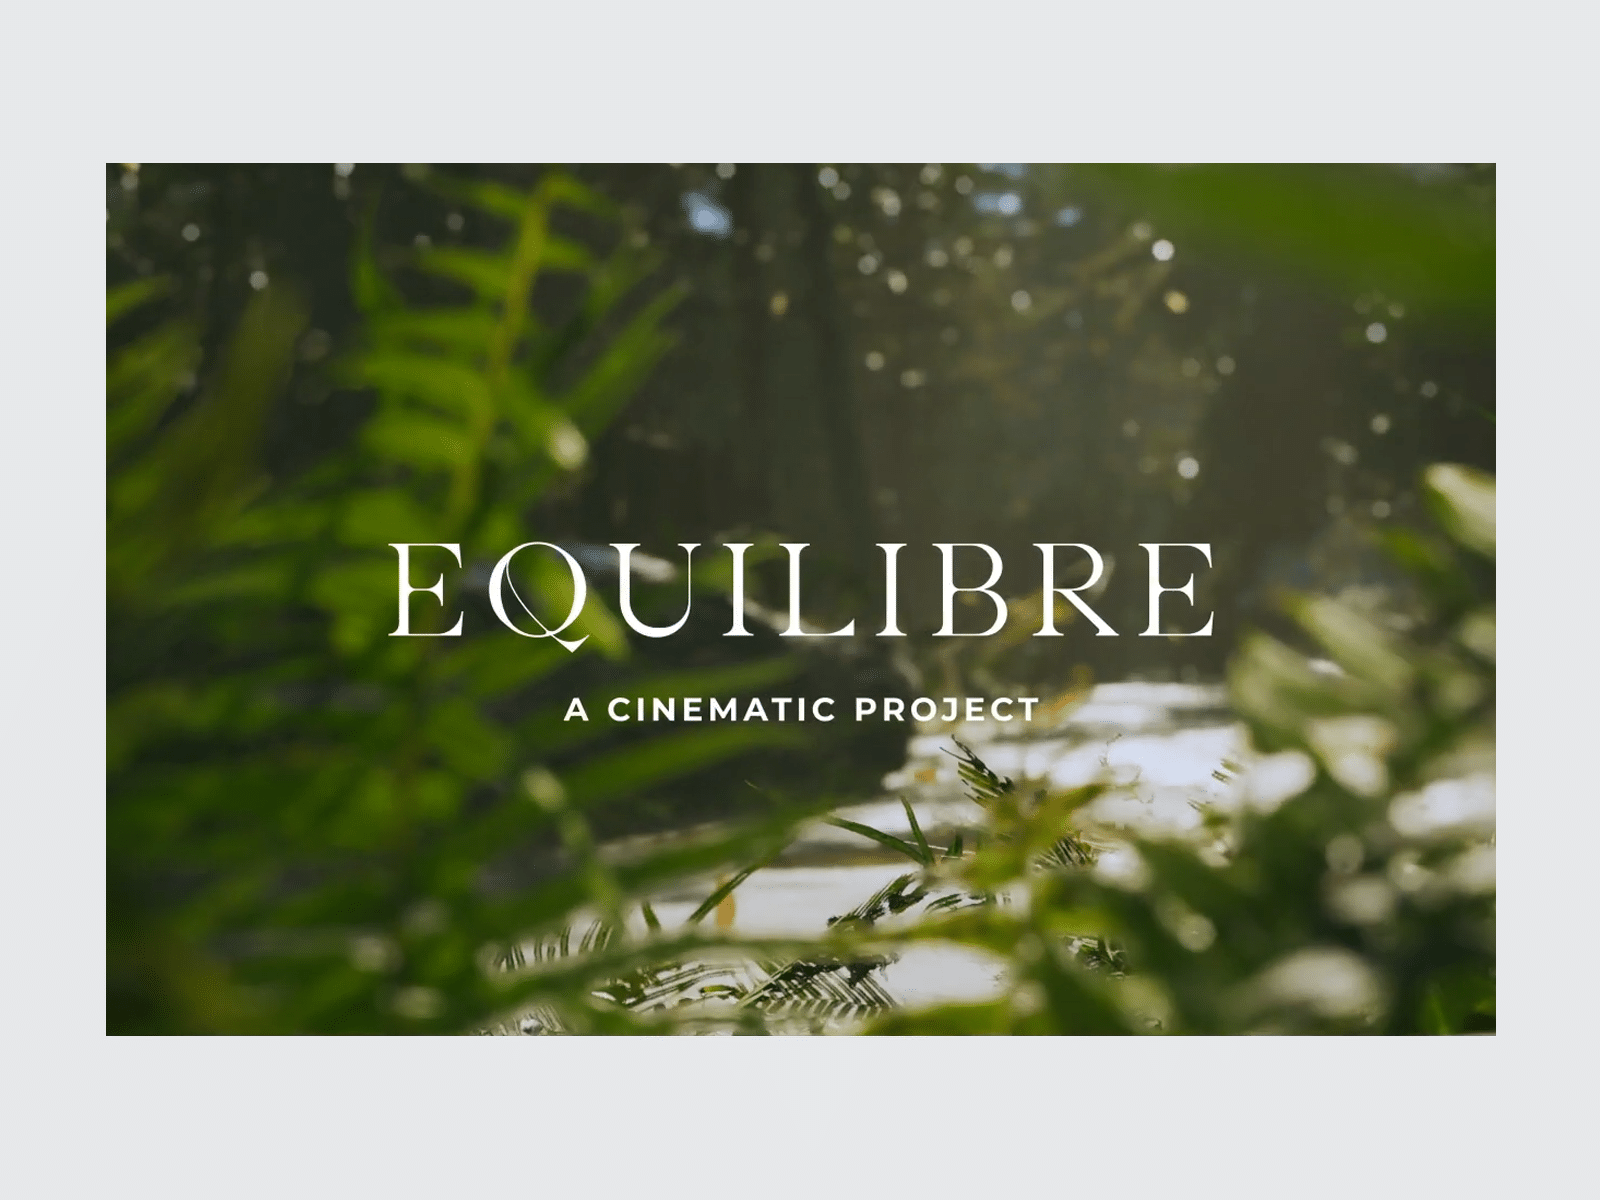 A cinematic project : Equilibre